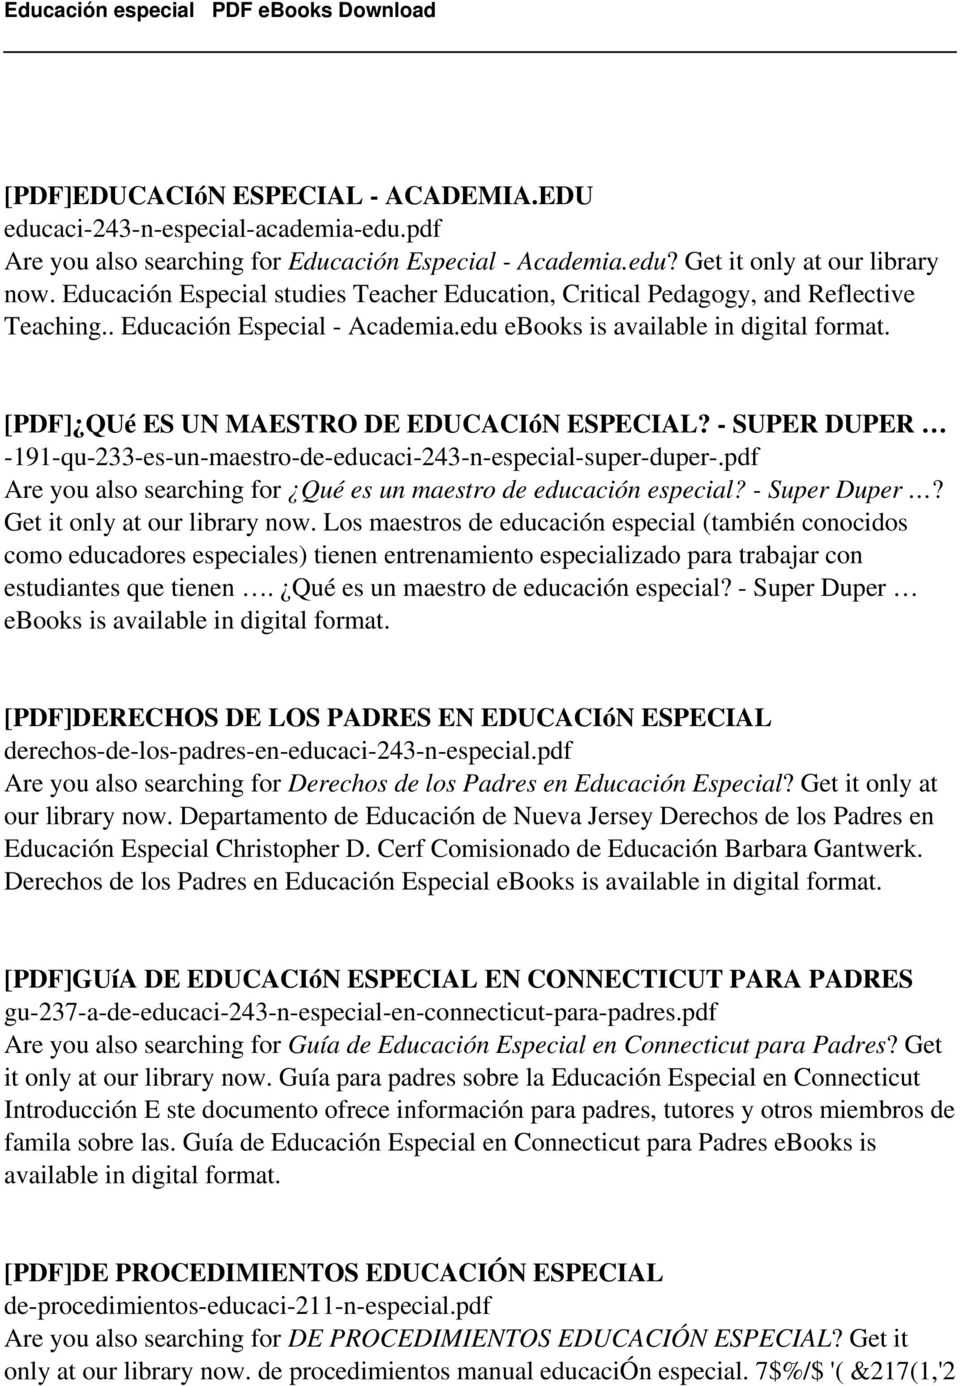 - SUPER DUPER -191-qu-233-es-un-maestro-de-educaci-243-n-especial-super-duper-.pdf Are you also searching for Qué es un maestro de educación especial? - Super Duper? Get it only at our library now.